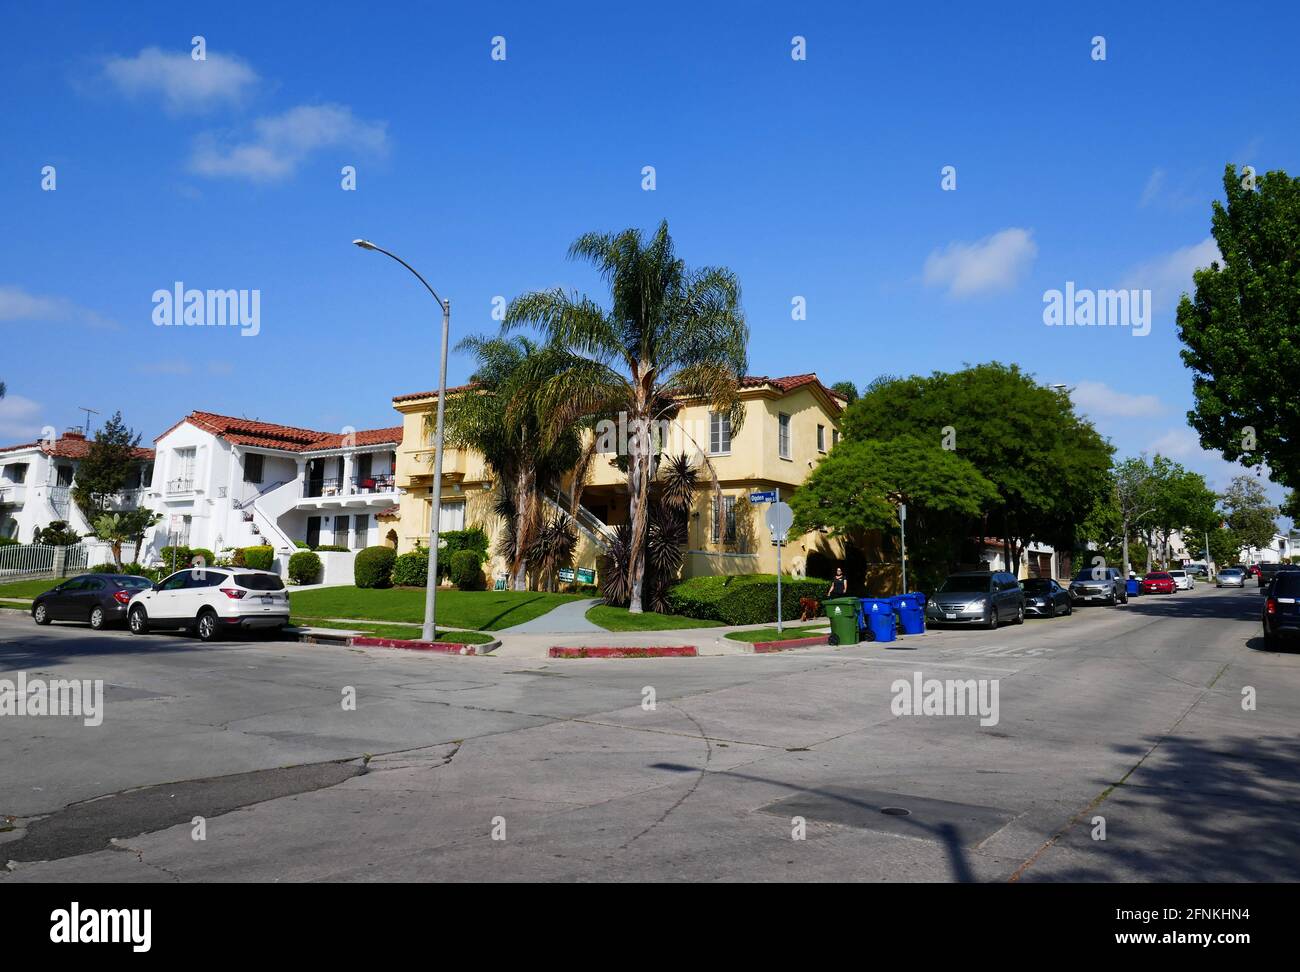 https://c8.alamy.com/comp/2FNKHN4/los-angeles-california-usa-17th-may-2021-a-general-view-of-atmosphere-of-actor-brad-renfros-final-homeapartment-and-death-location-where-he-died-at-1092-south-ogden-drive-in-los-angeles-california-usa-photo-by-barry-kingalamy-stock-photo-2FNKHN4.jpg